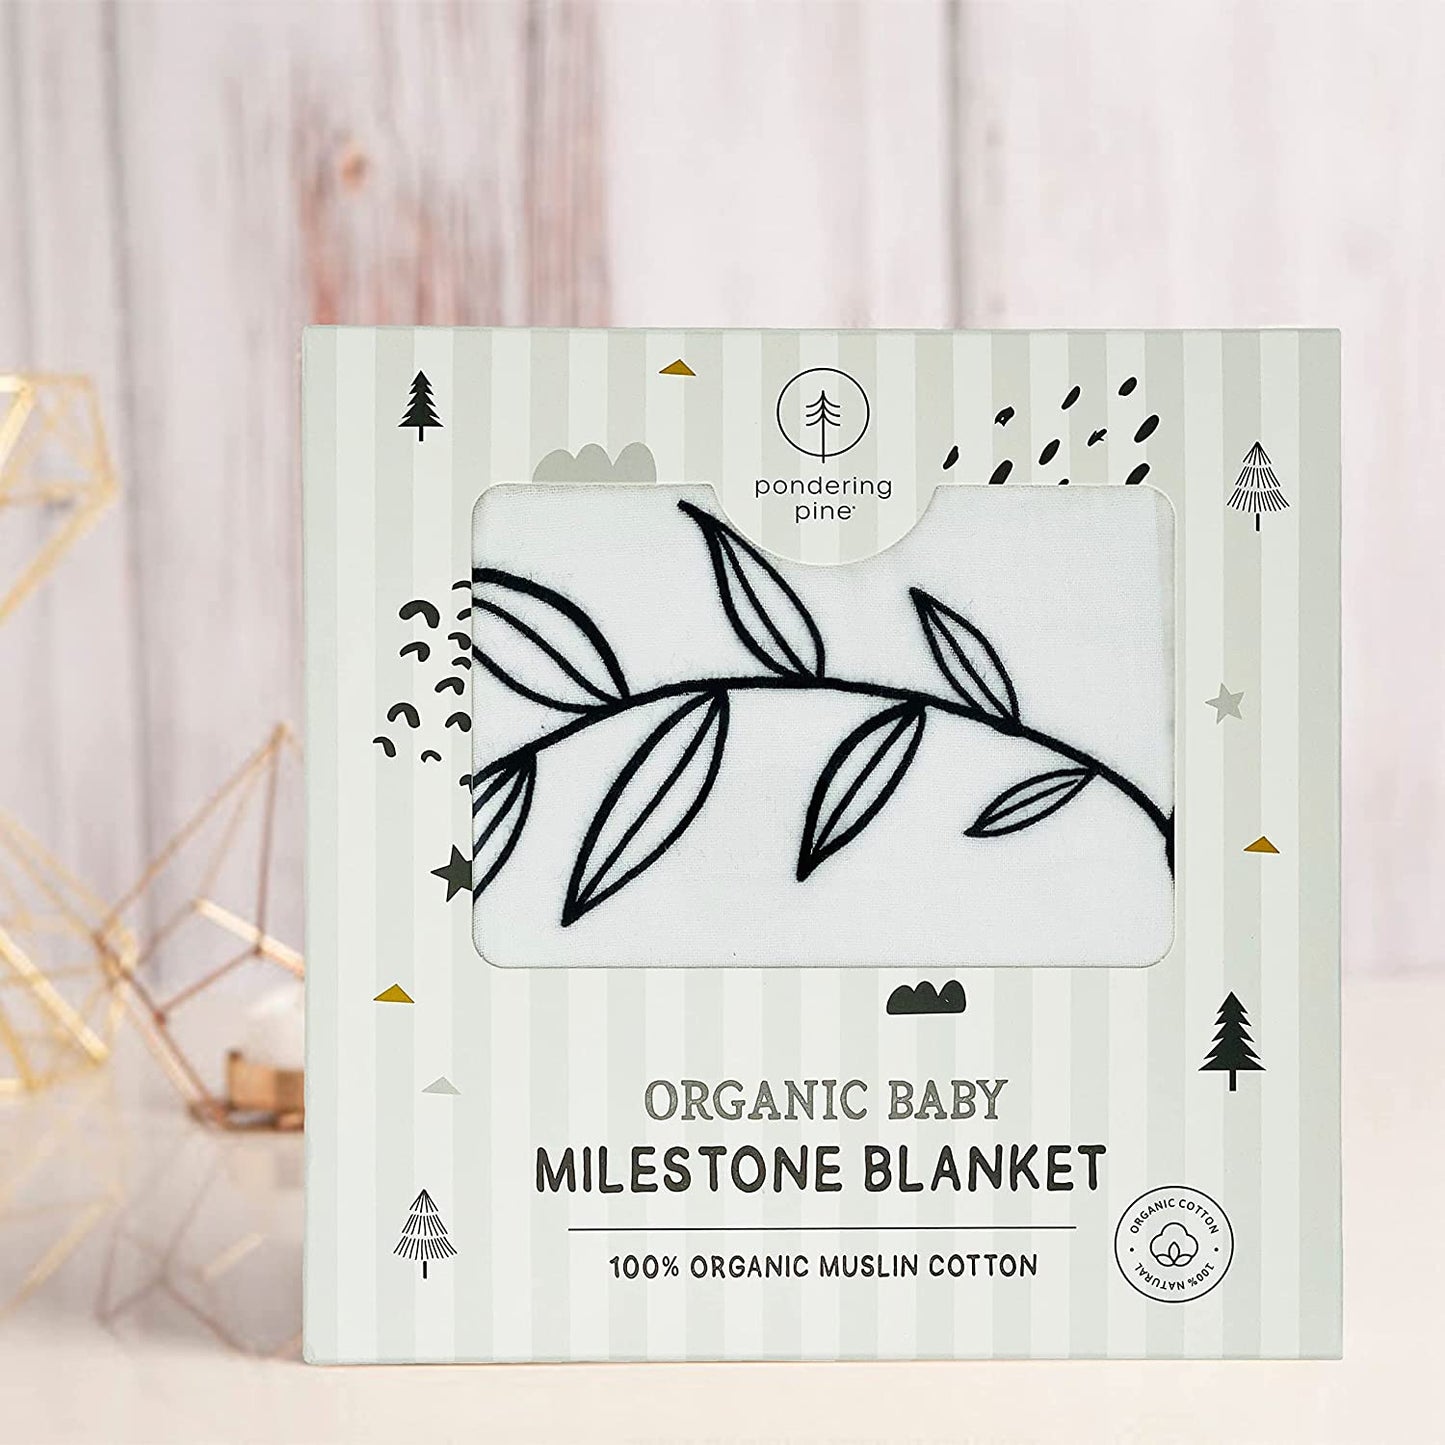 Organic Baby Monthly Milestone Blanket Boy or Girl - Milestone Blanket Neutral with Wood Frame - Forever Loved Baby Month Blanket with Growth Chart, 1-12 Months Milestones, 47”x47” - (For 1 piece(s))